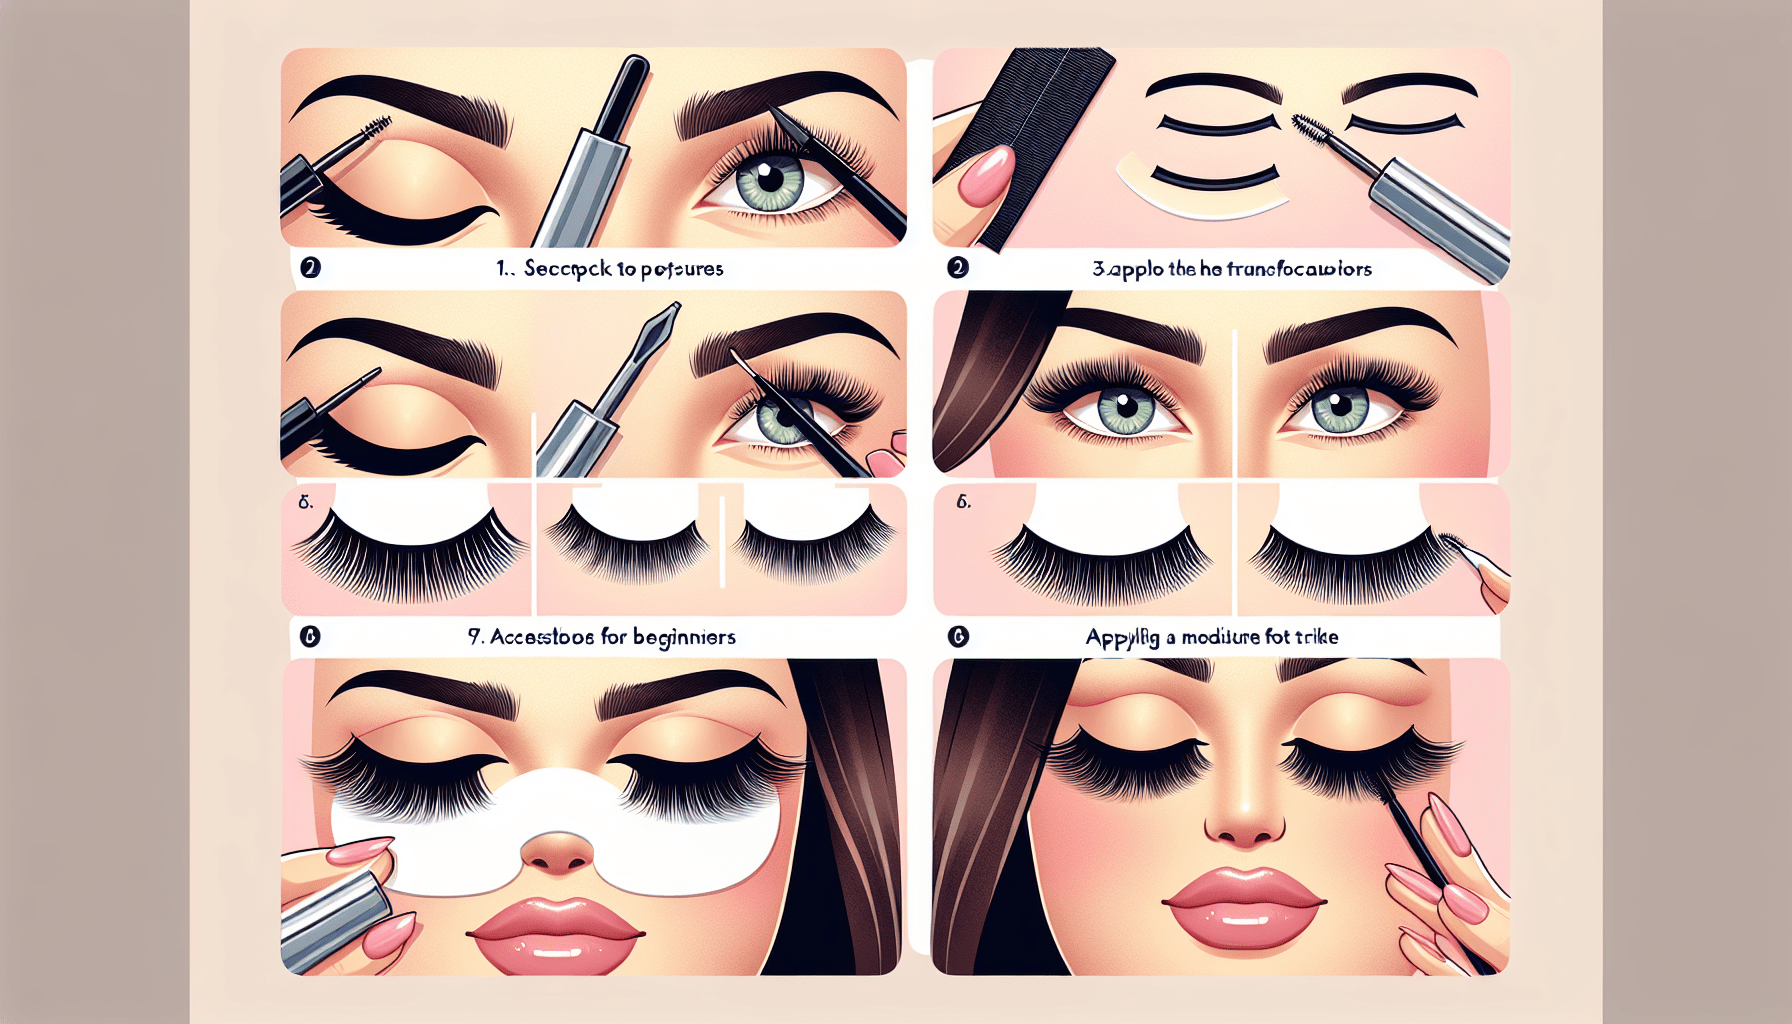 What Are Some Tips For False Eyelash Application For Beginners?